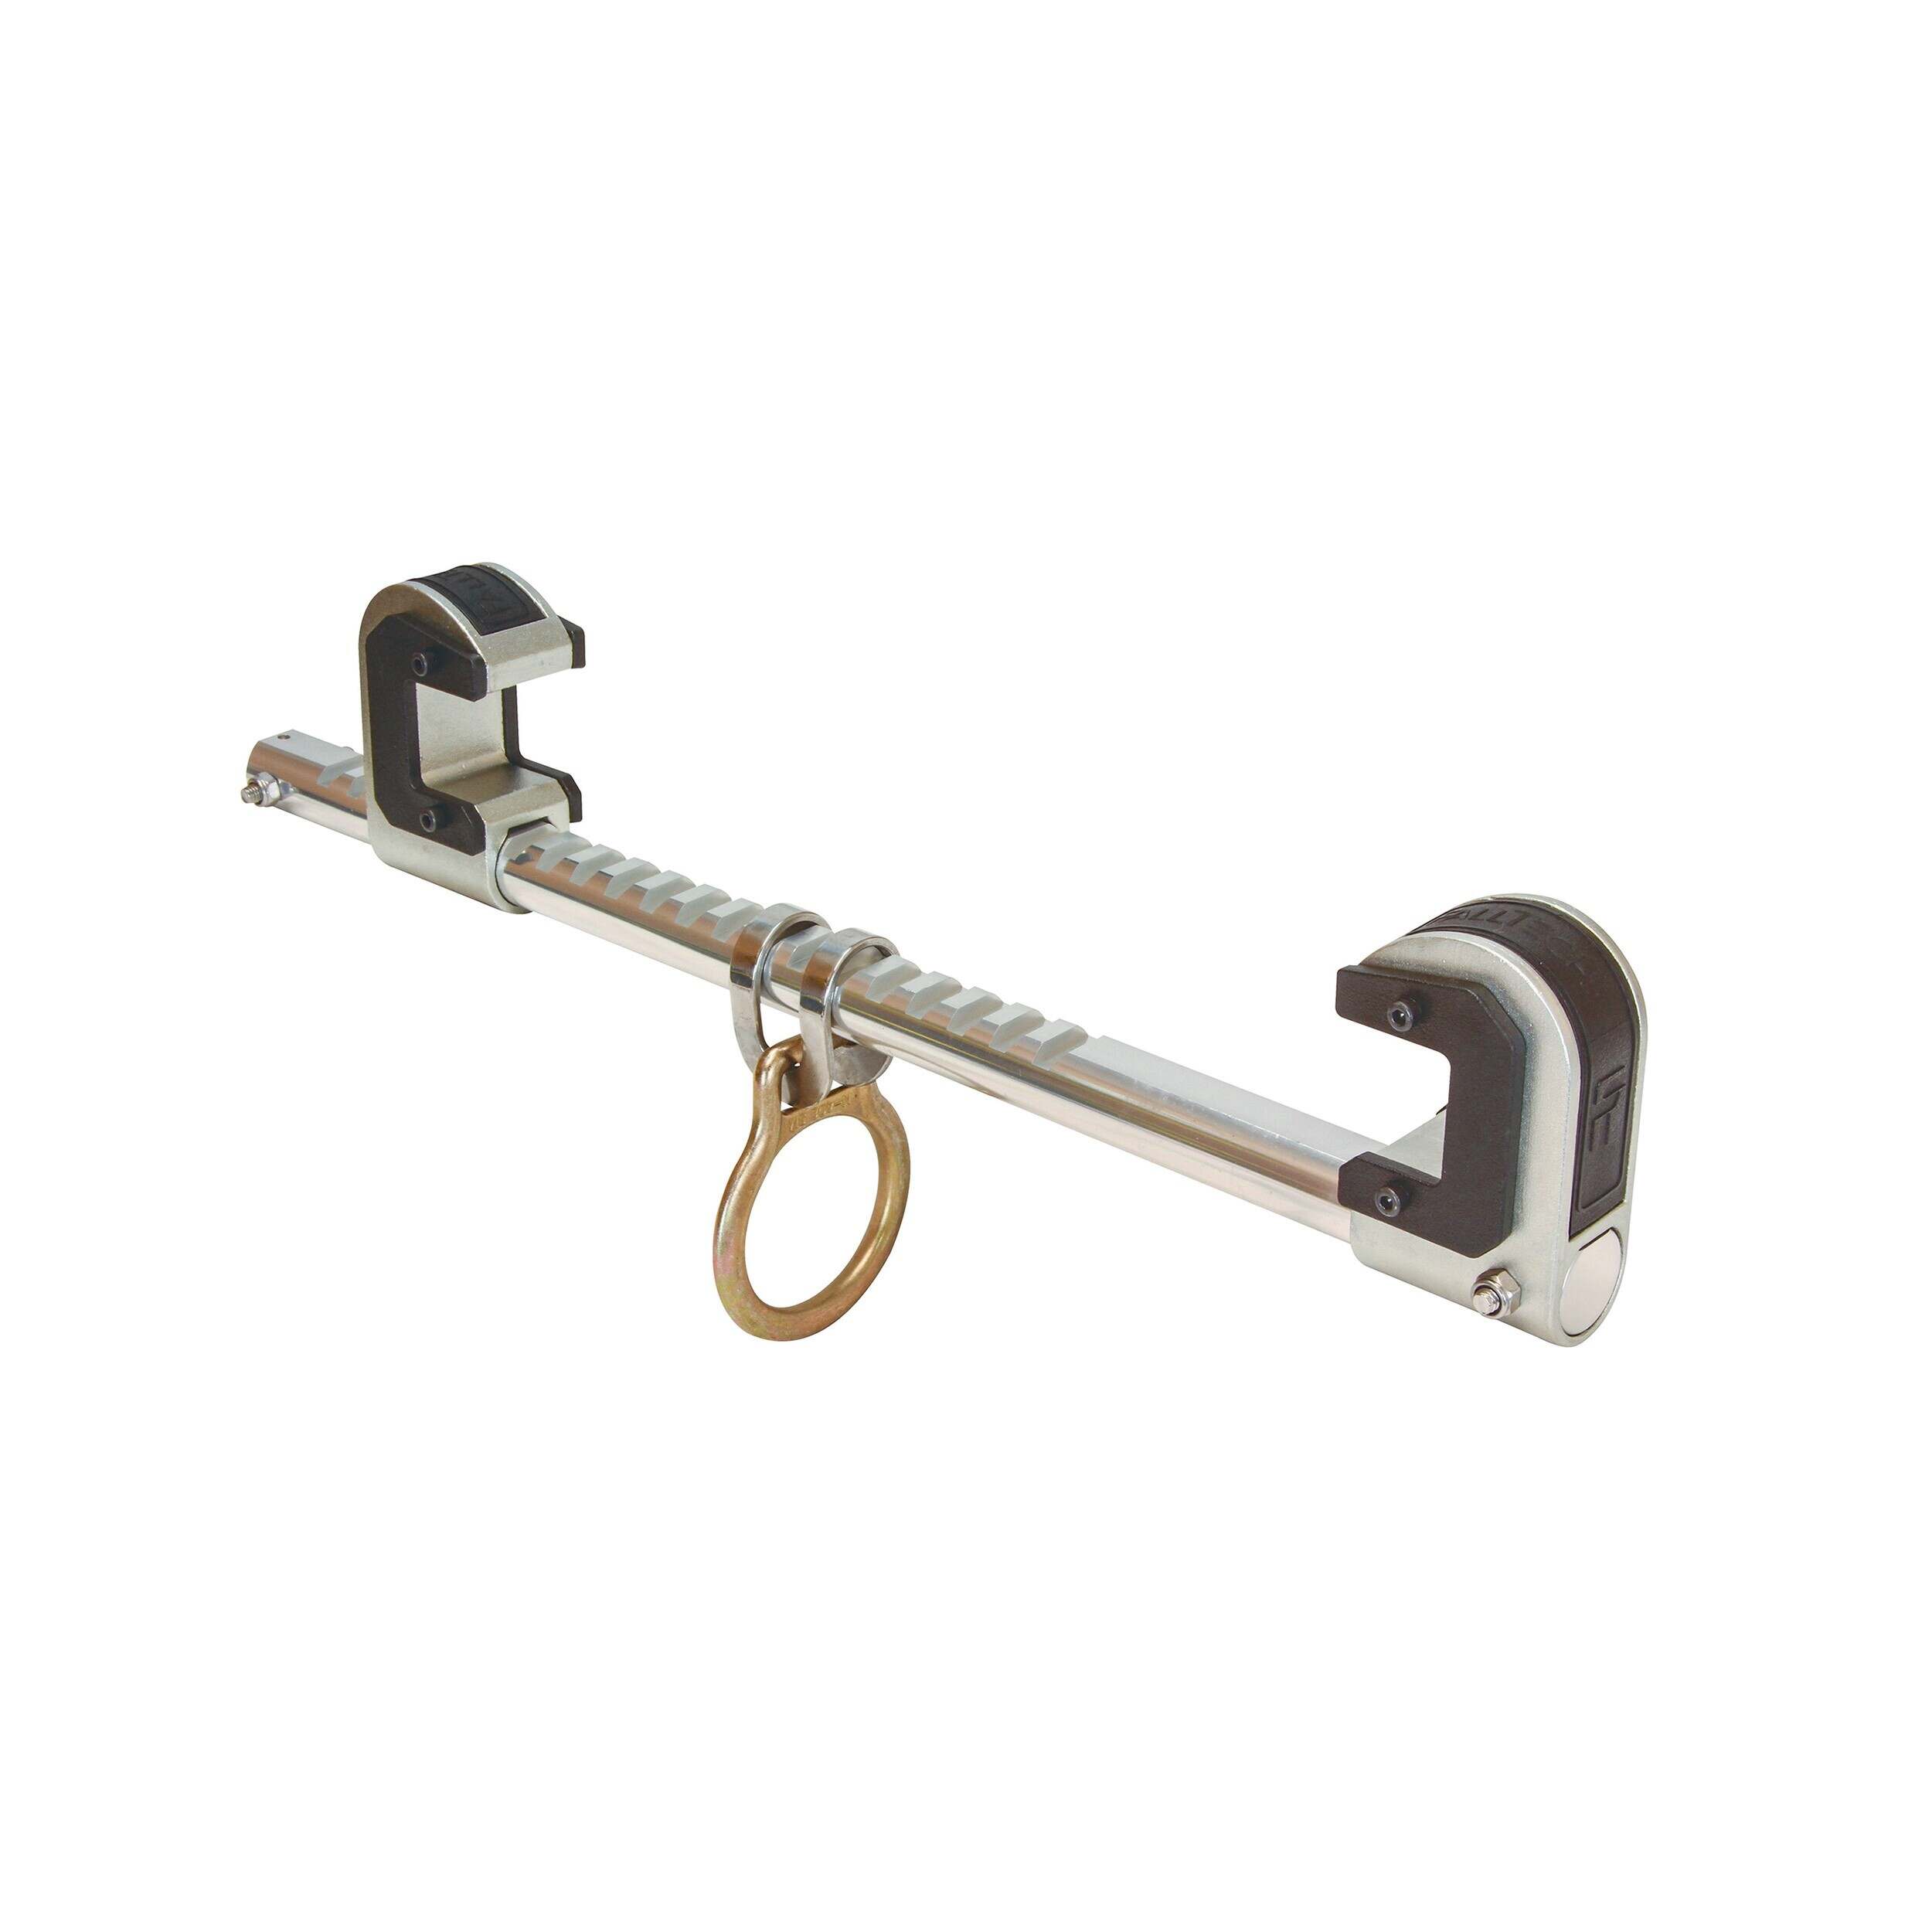 FallTech (7531) Trailing Beam Anchor with Single-clamp Adjustment, 14-1/2